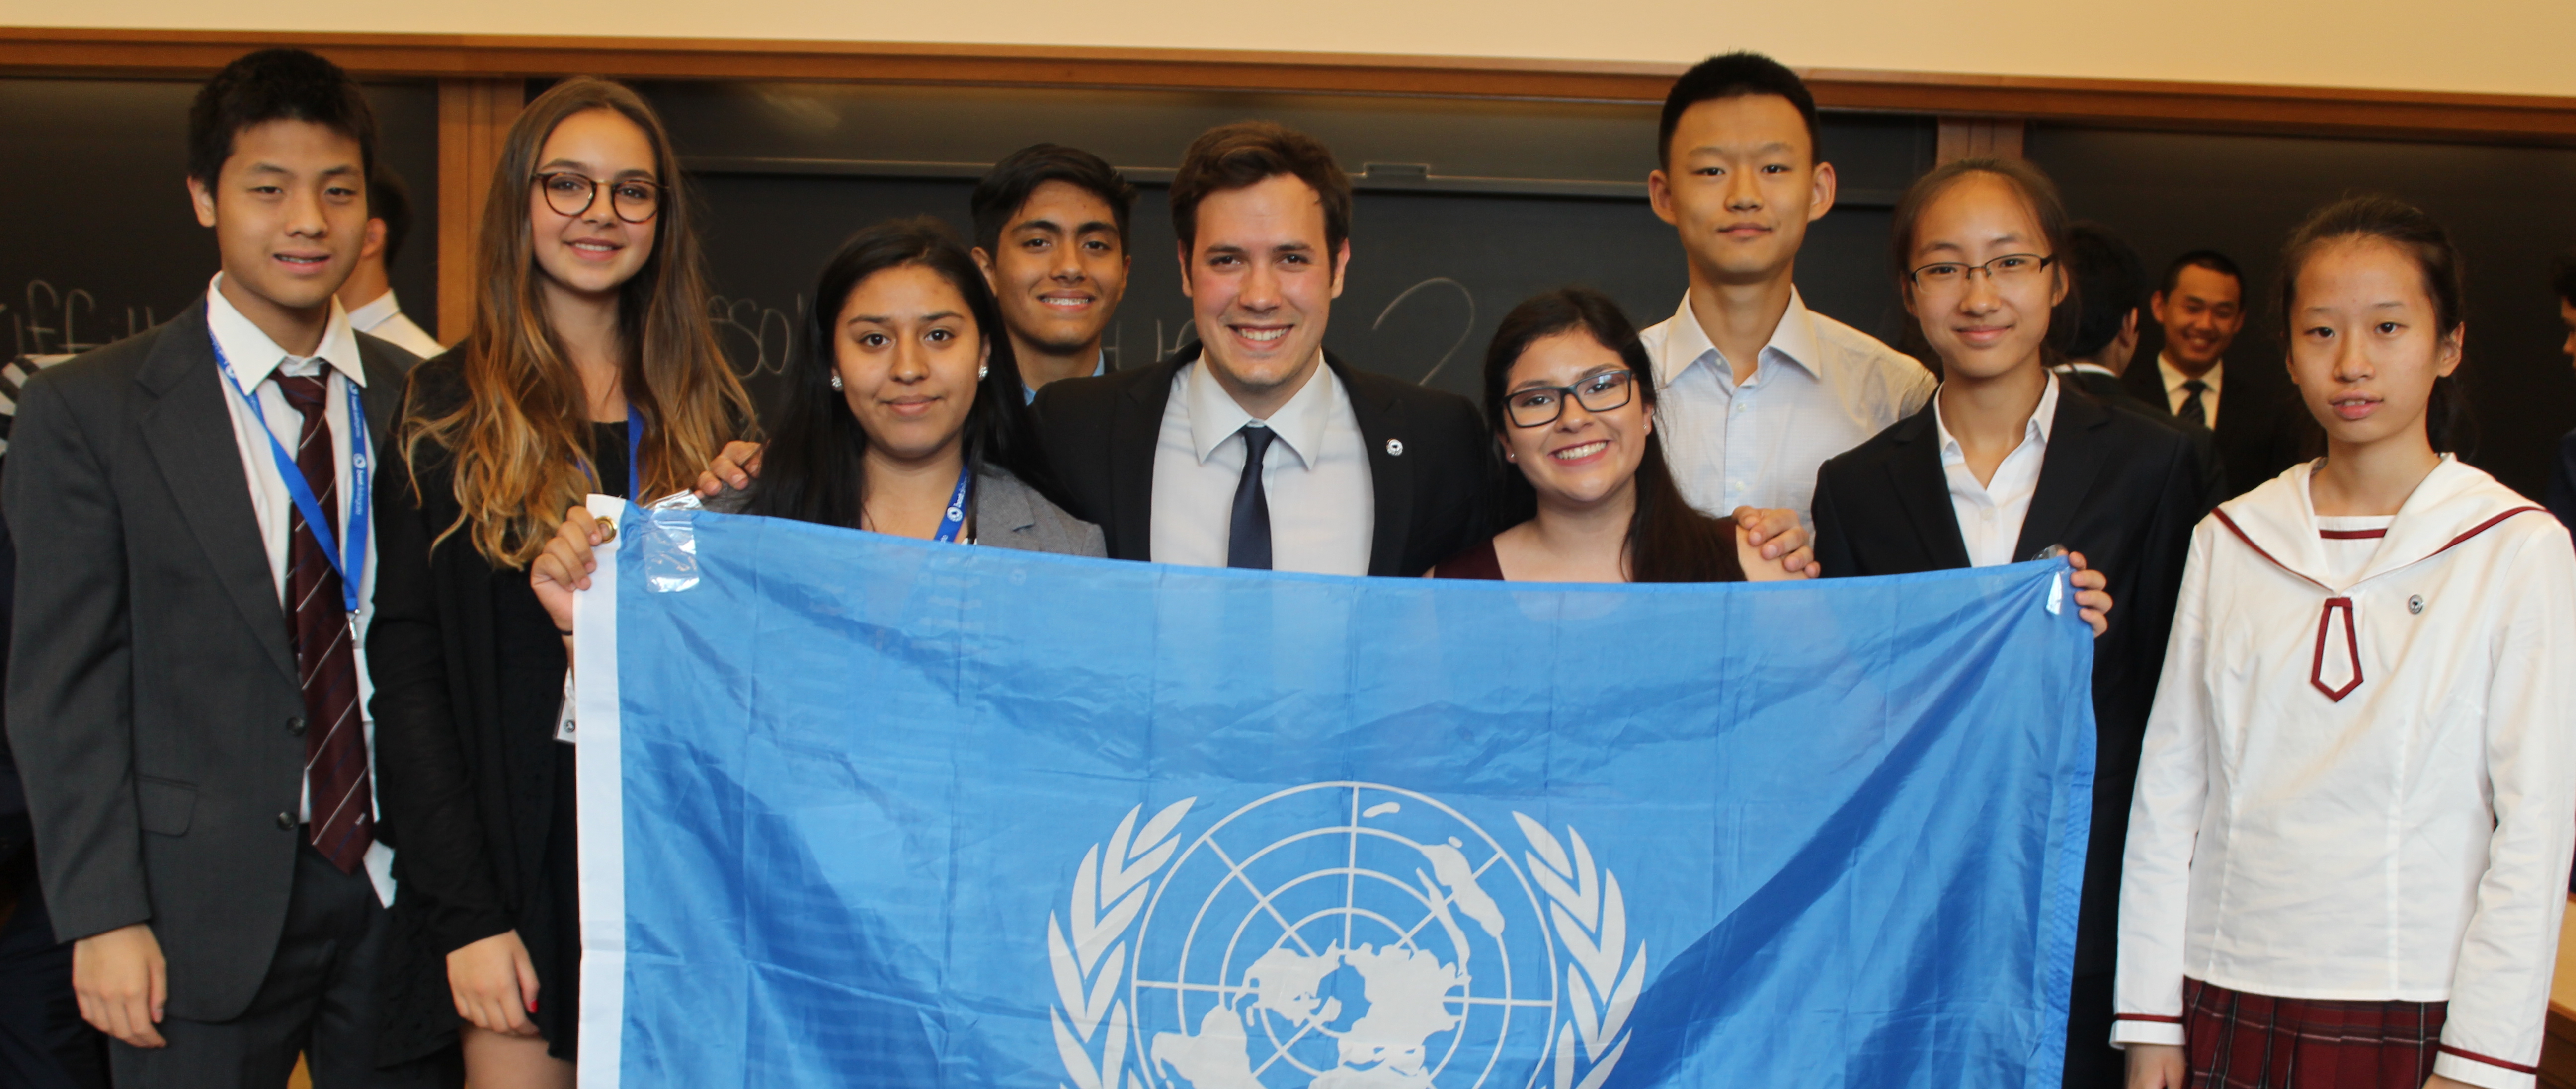 summer camp, MUN, model united nations, english learners